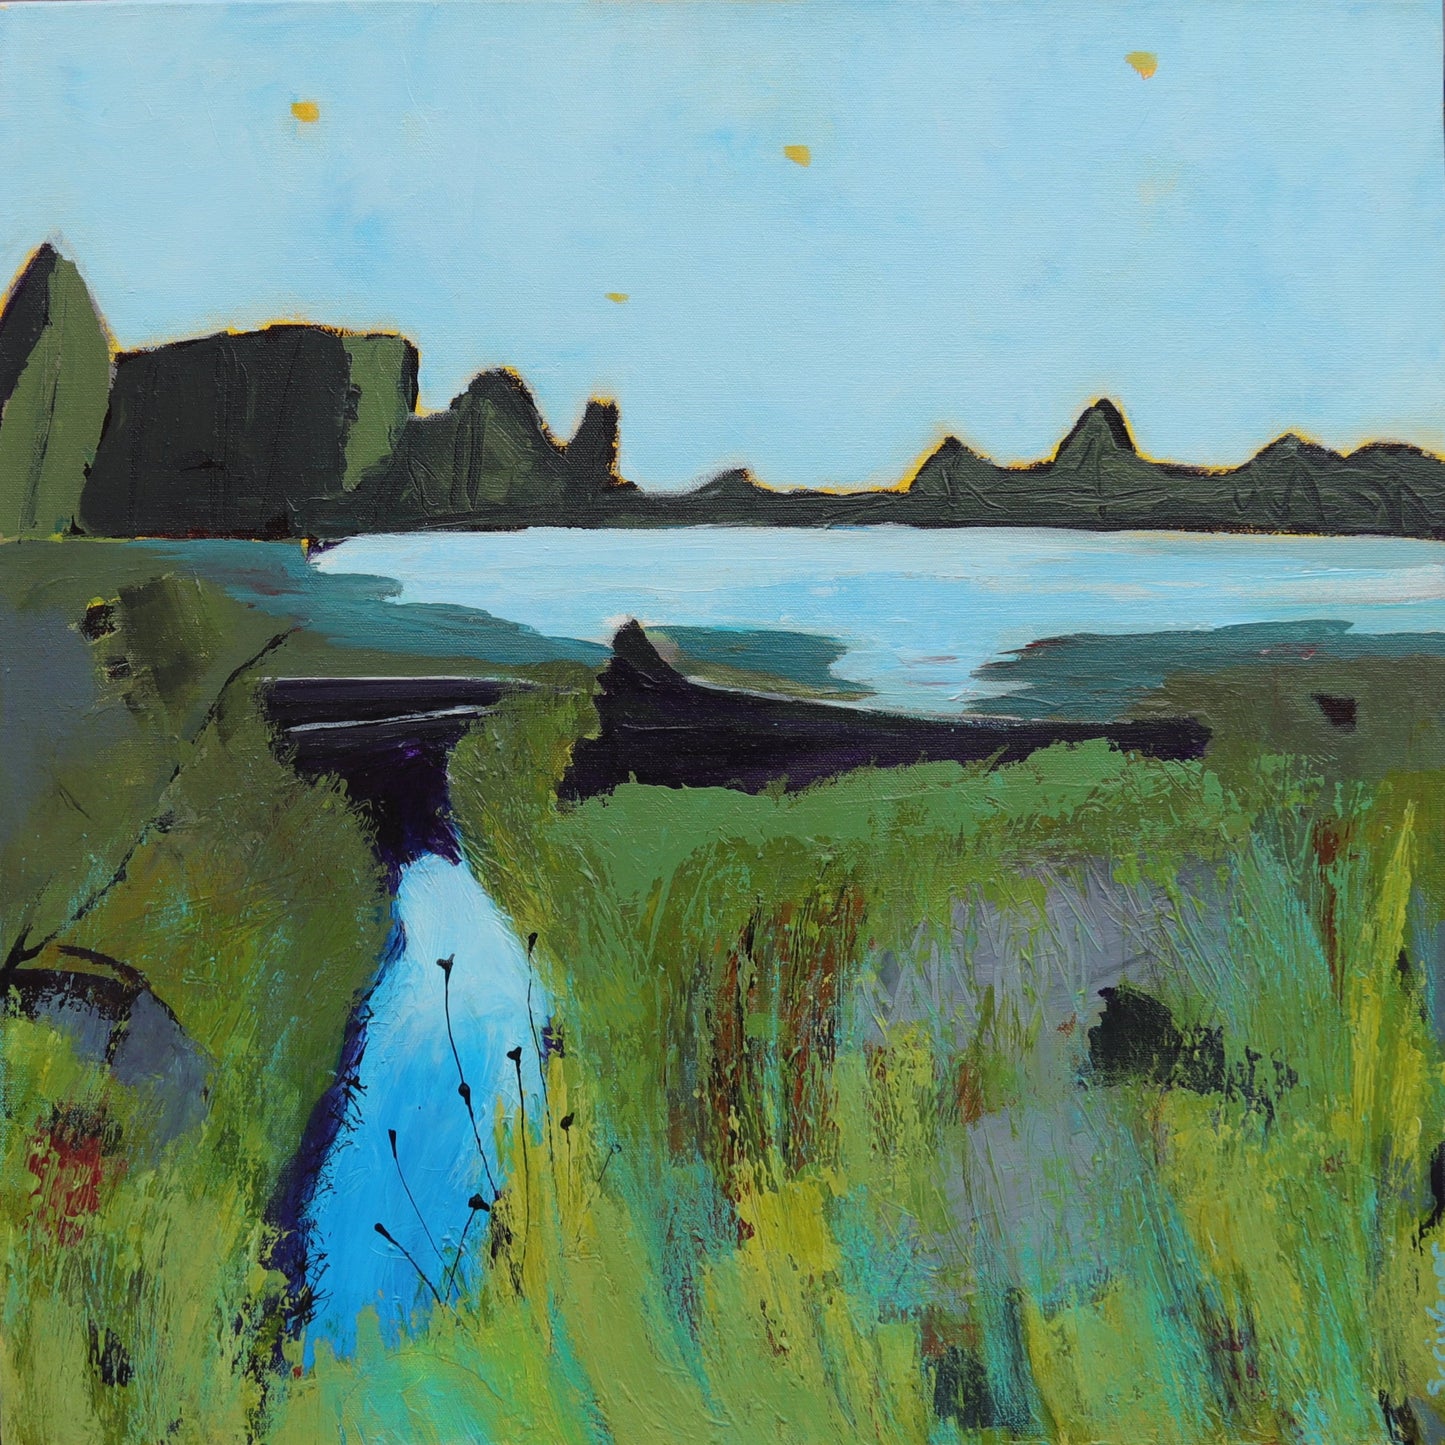 SIMPLIFY THE LANDSCAPE in Acrylic/Mixed Media 2 Day Workshop ZOOM - MAY 25&26